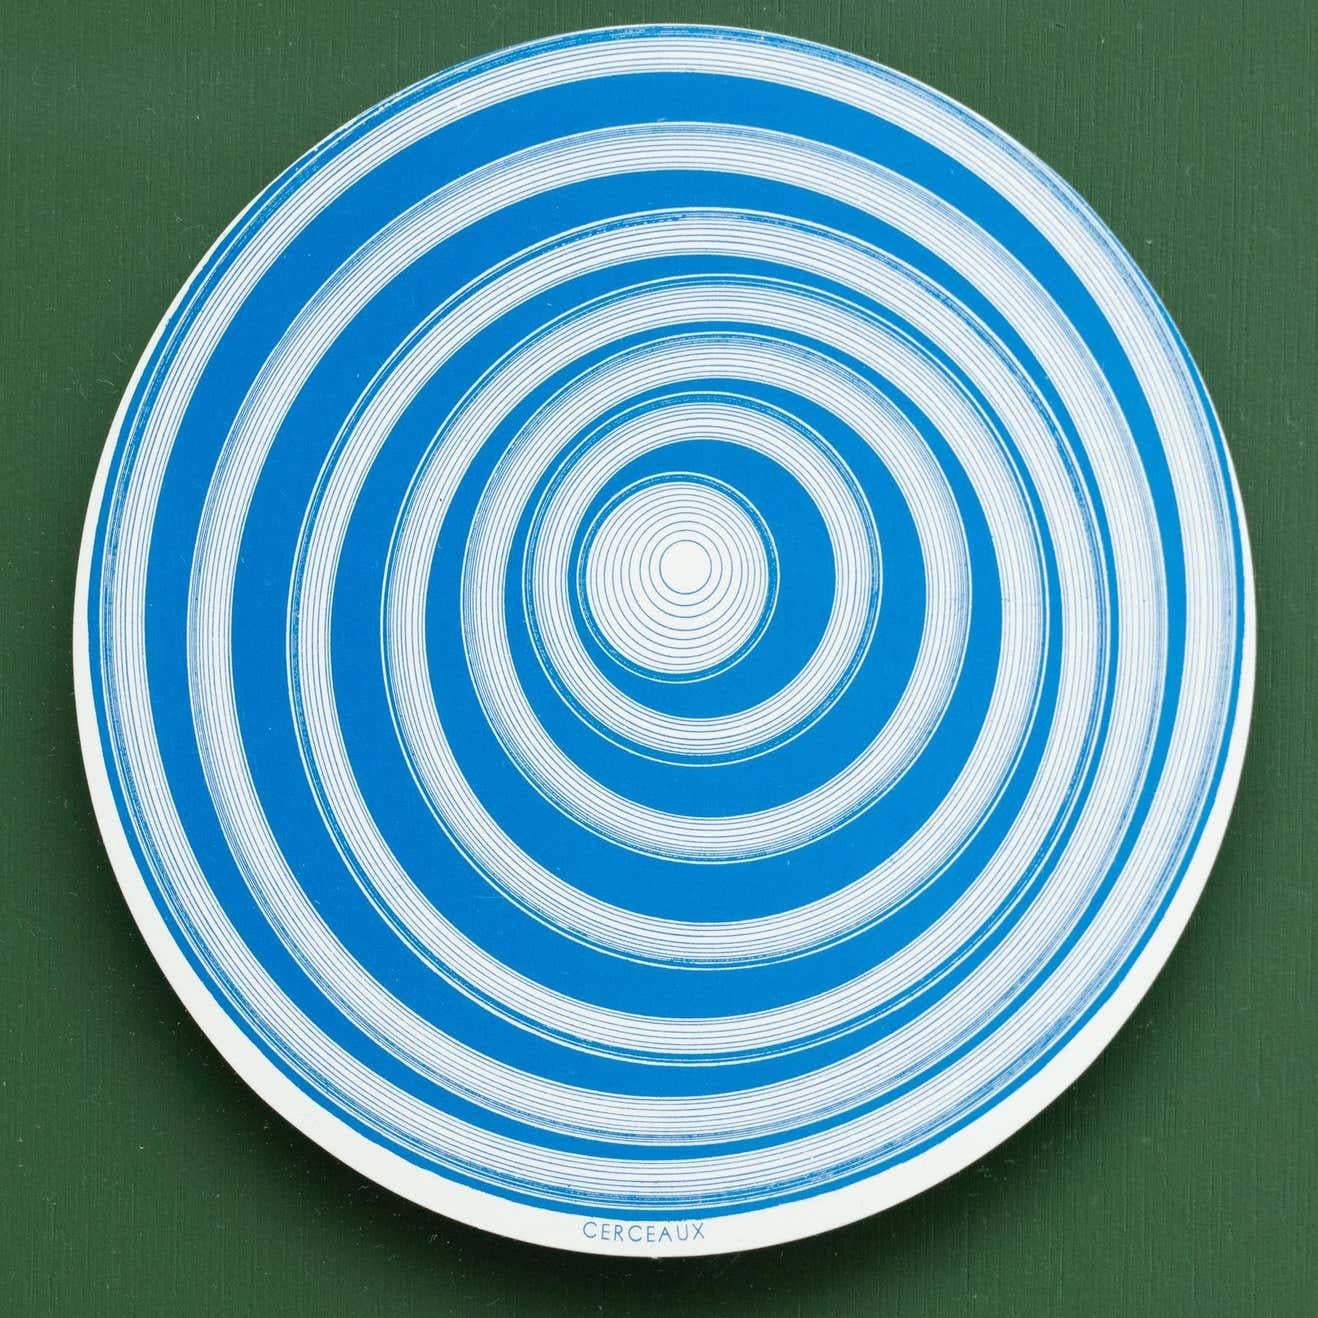 Set of 6 Marcel Duchamp rotoreliefs, 1987 Konig Series 133.

Henri-Robert-Marcel Duchamp (French 28 July 1887–2 October 1968) was a French, naturalized American painter, sculptor, chess player and writer whose work is associated with Cubism,